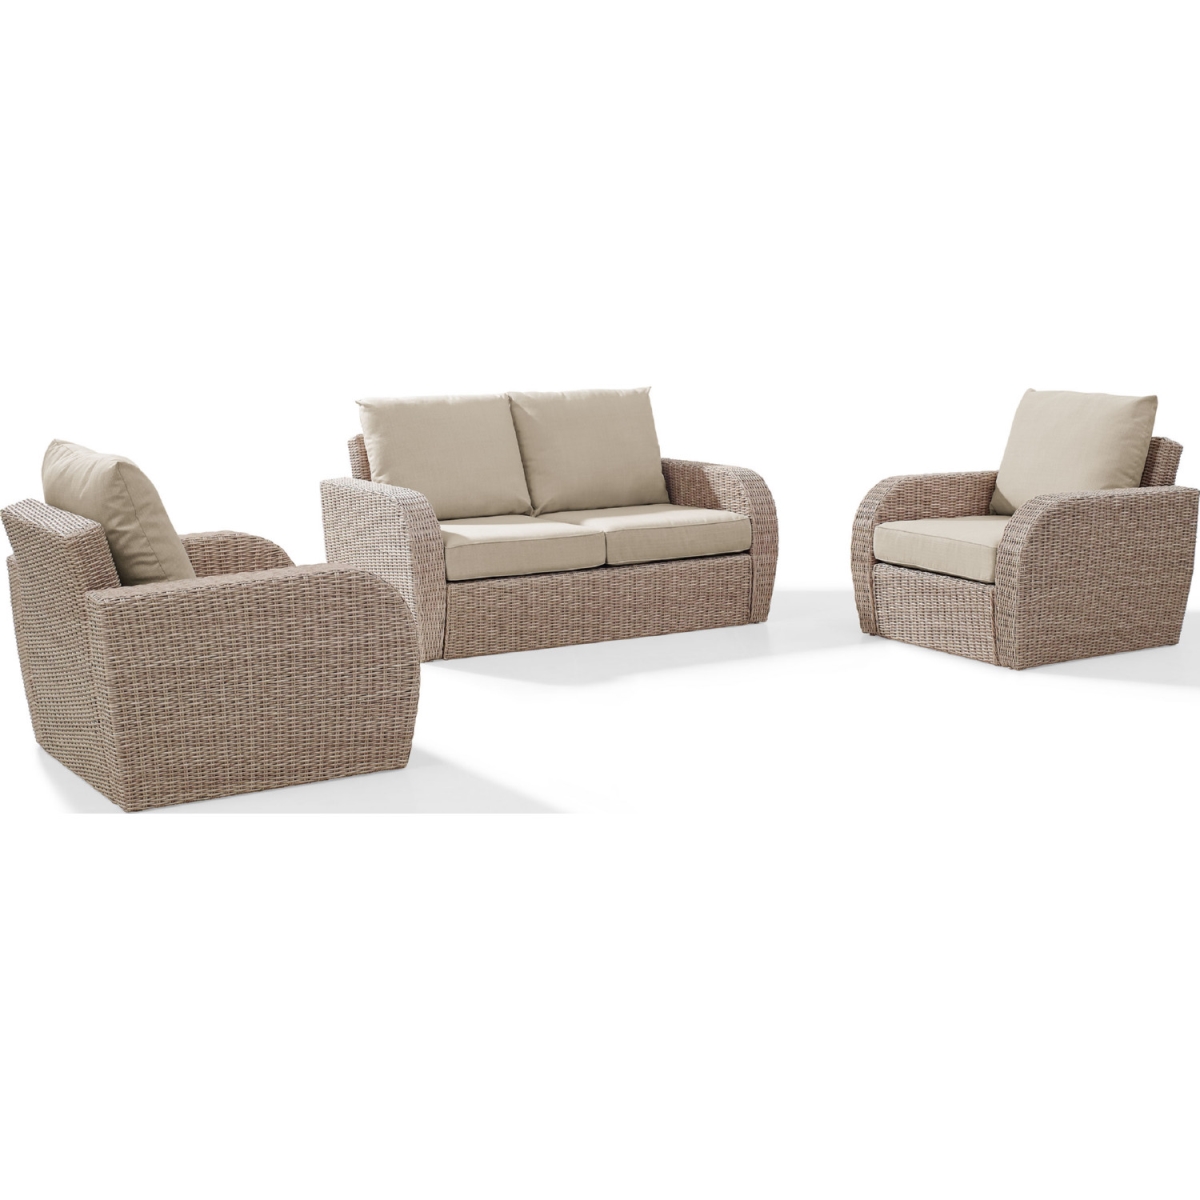 Ko70134wh-ol 3 Piece St. Augustine Outdoor Wicker Seating Set With Oatmeal Cushion - Loveseat, Two Outdoor Chairs